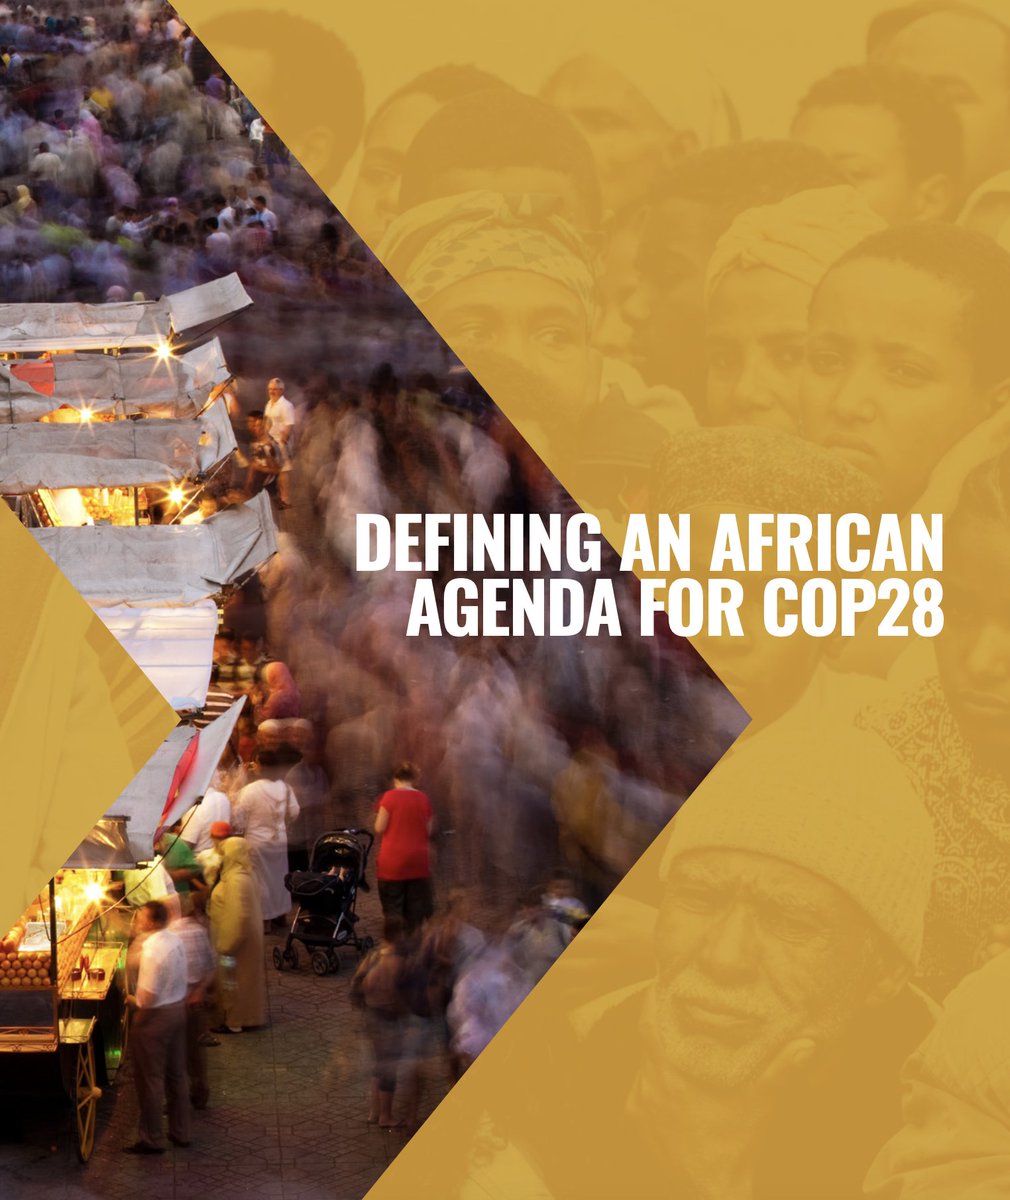 AFRICA'S AGENDA AT #COP28 As the world heads to #COP28UAE Africa has outlined the following priority areas: This COP MUST: ✅Address Climate-Induced #LossandDamage ✅Support Africa's #JustTransitions and Sustainable Development ✅Strengthen #Adaptation Action and Support…